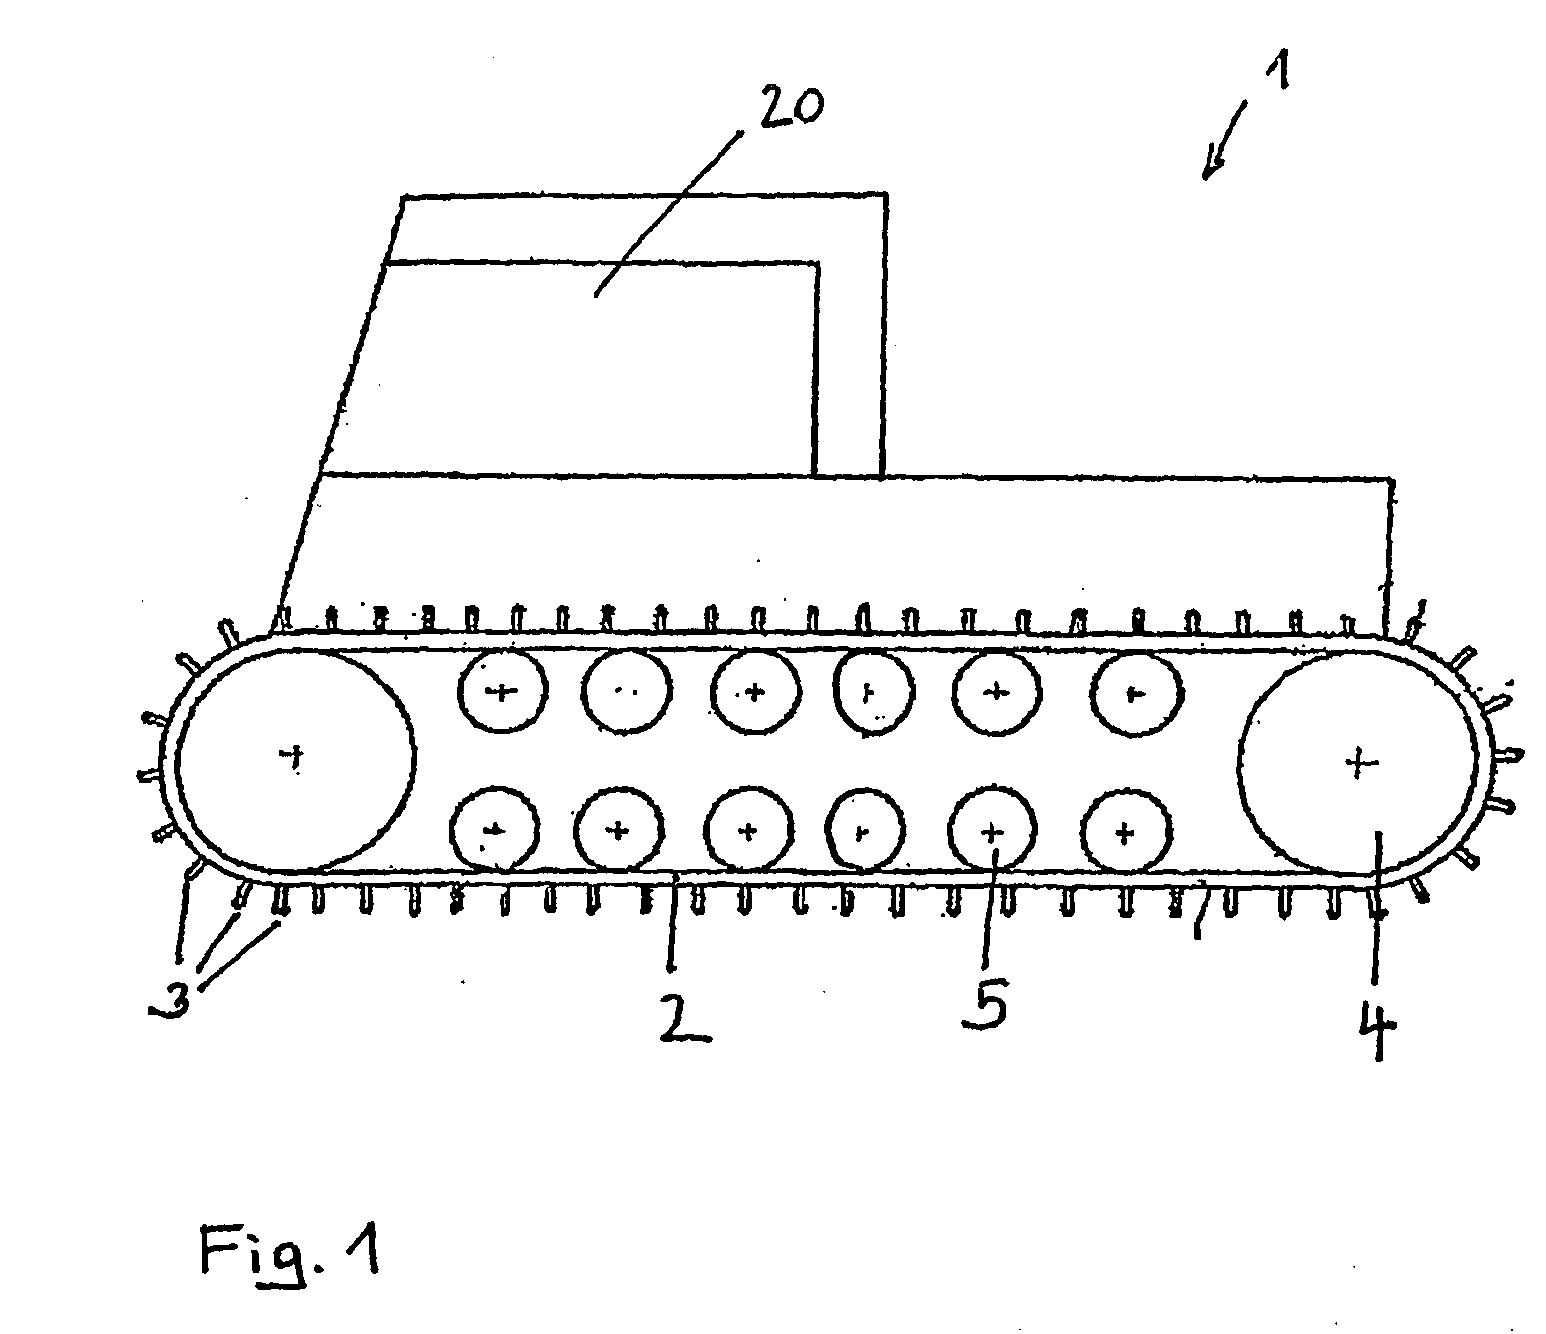 Stud for a Crawler Pertaining to Crawler-Type Vehicles, Especially Ski Slope Grooming Vehicles or Appliances for Tracing Cross-Country Ski Runs